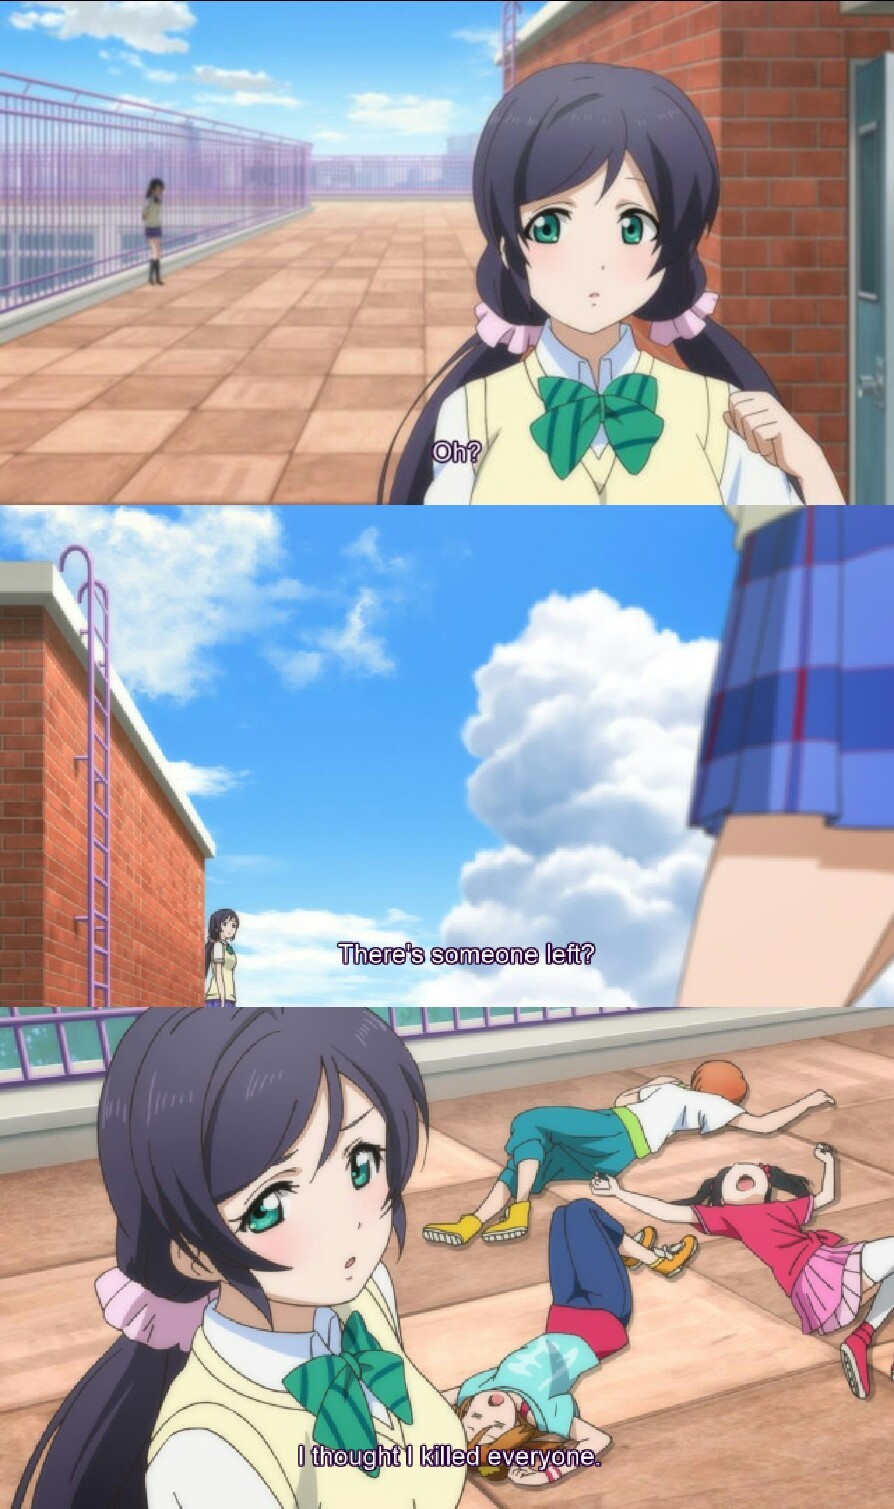 Totally real lines from Love Live! I swear - Meme by willowstar :) Memedroid